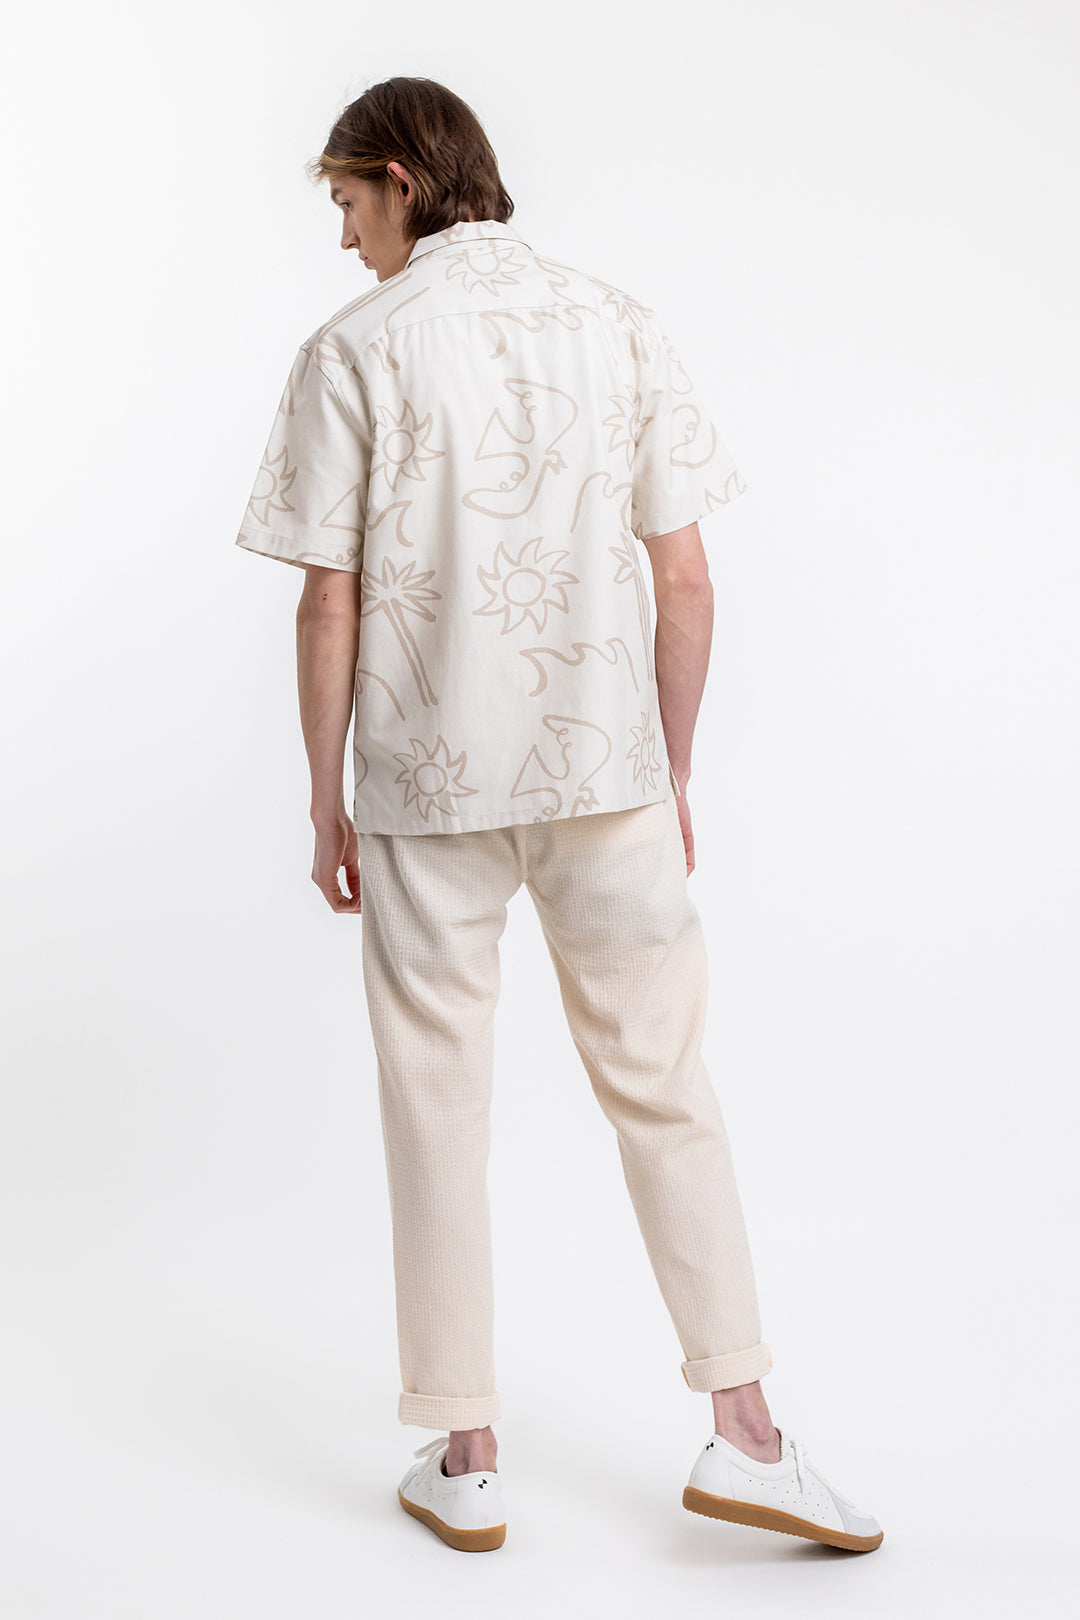 Beige Beachside shirt made from 100% organic cotton from Rotholz